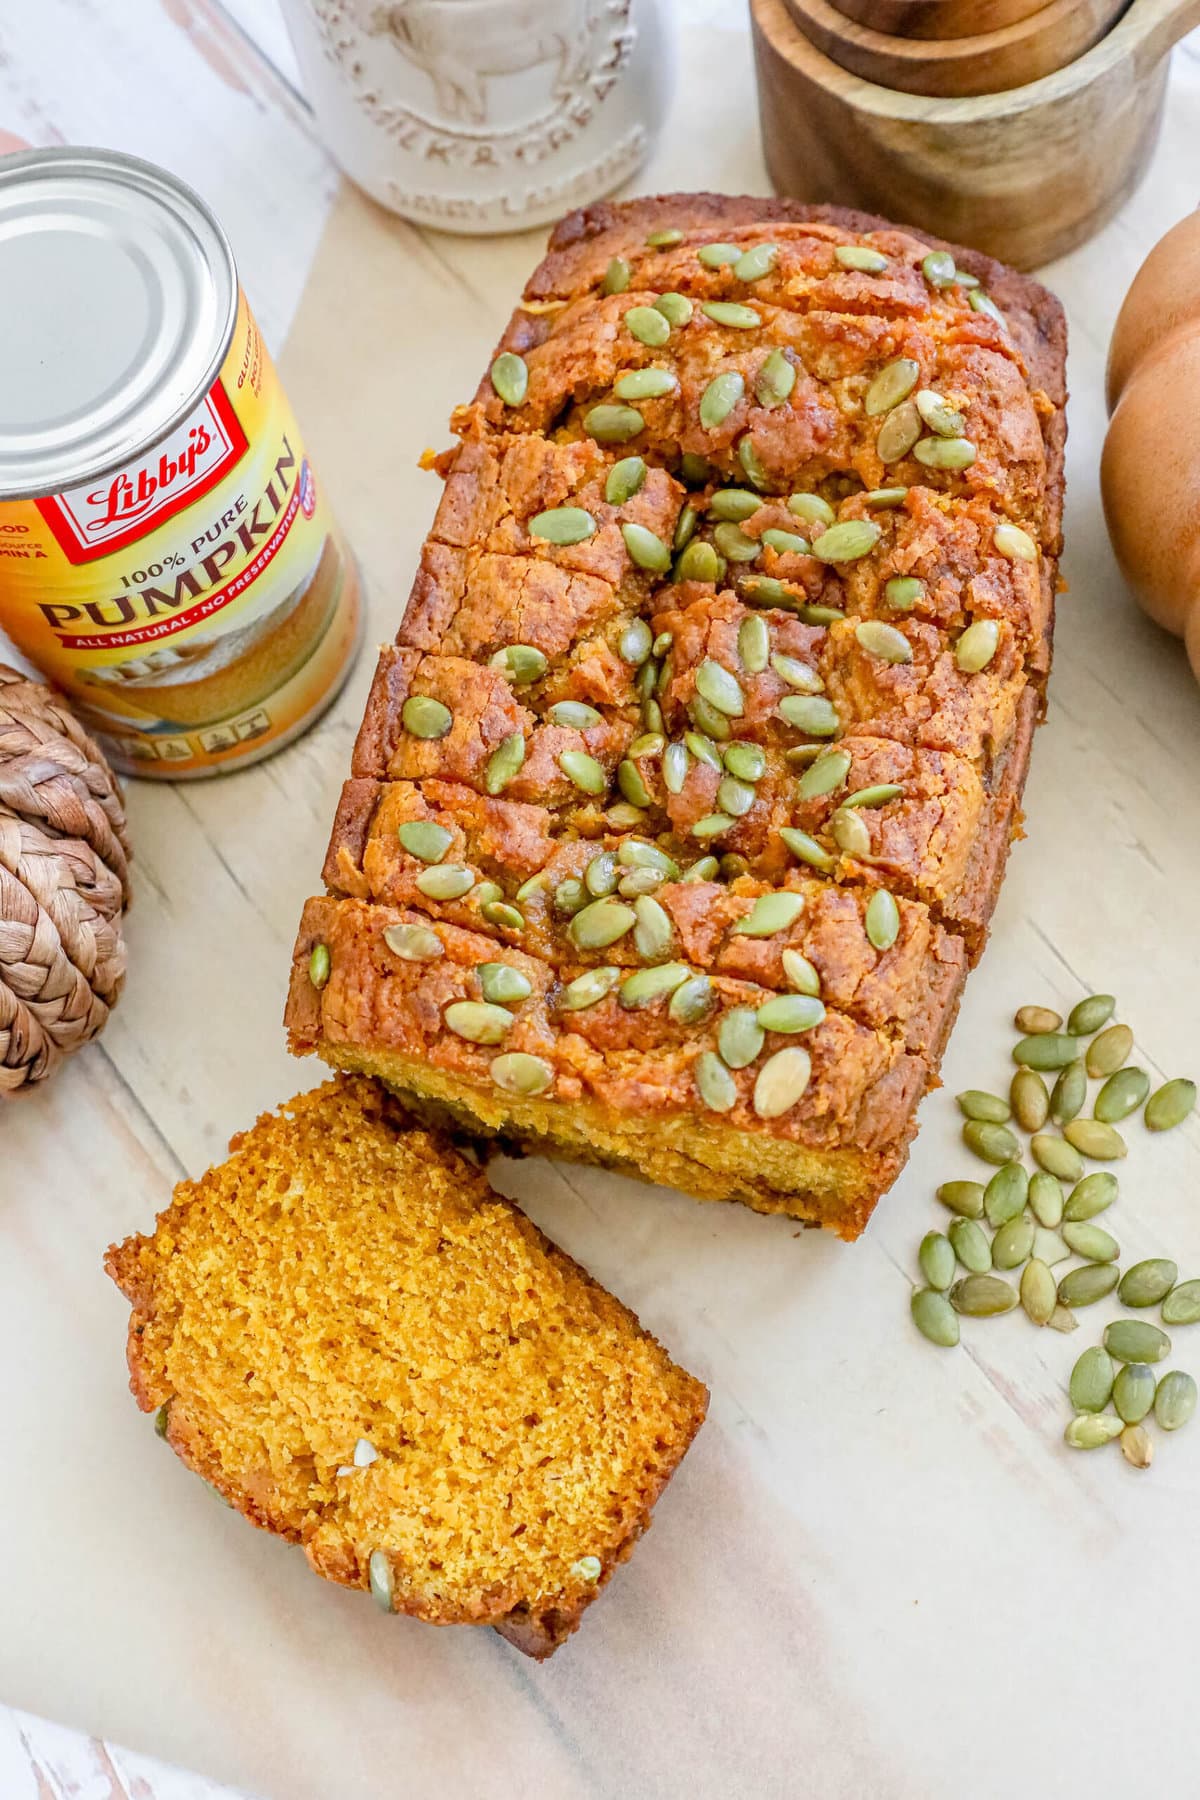 picture of pumpkin bread with pumpkin seeds baked onto the top sliced on a table